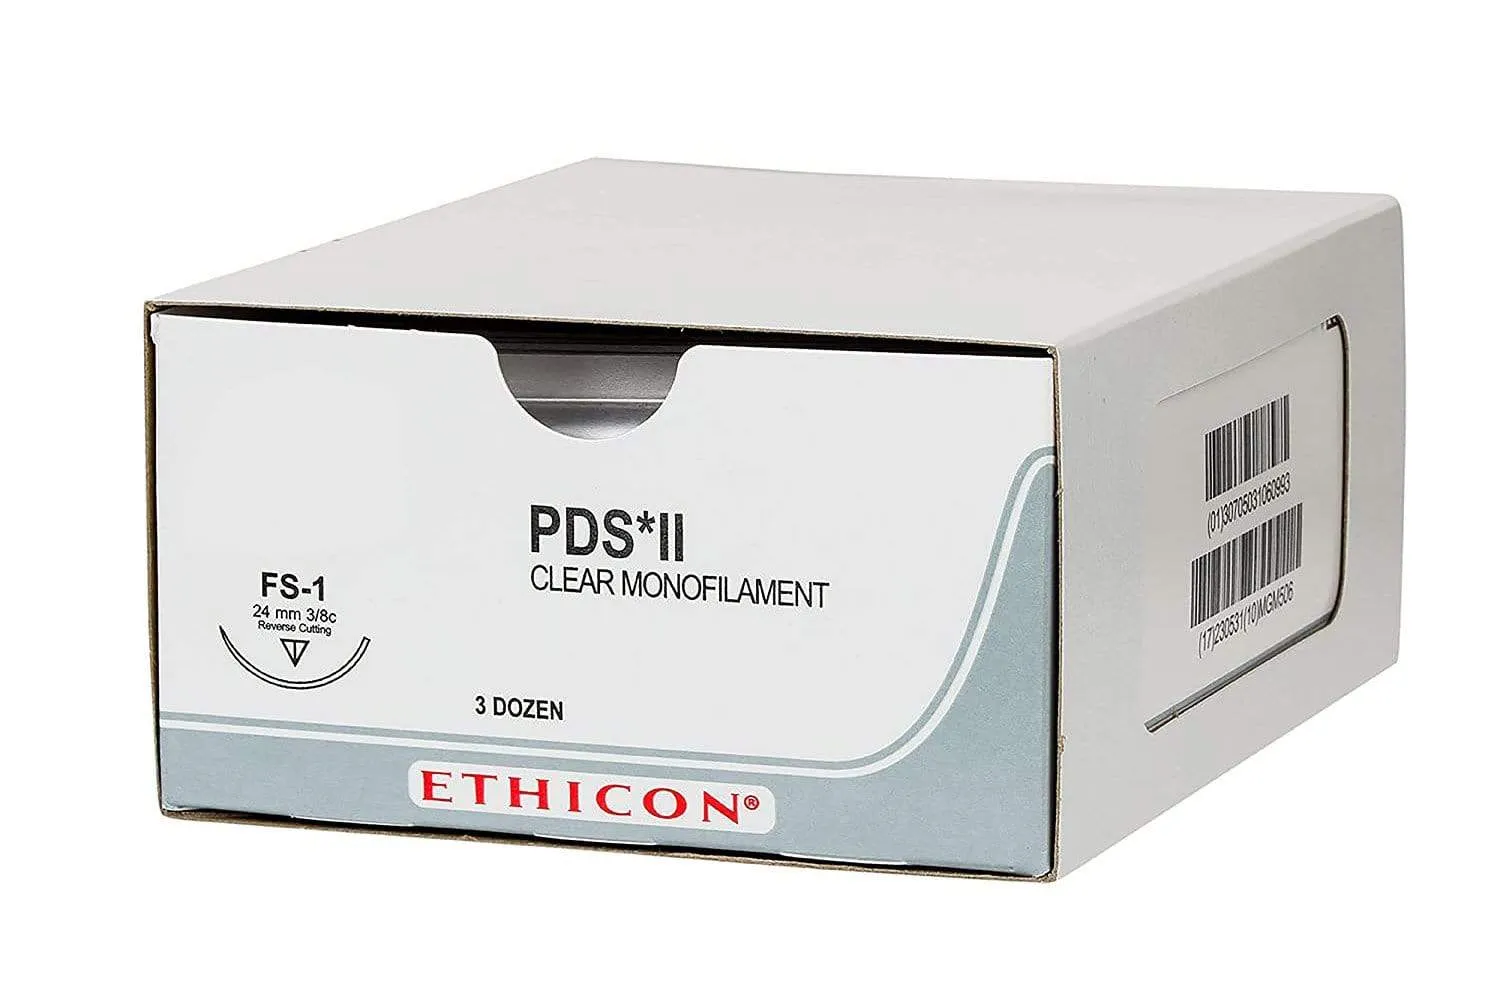 Ethicon PDS II Sutures USP 0, 1/2 Circle Taper Cut V-37 - W9371T -12 Foils